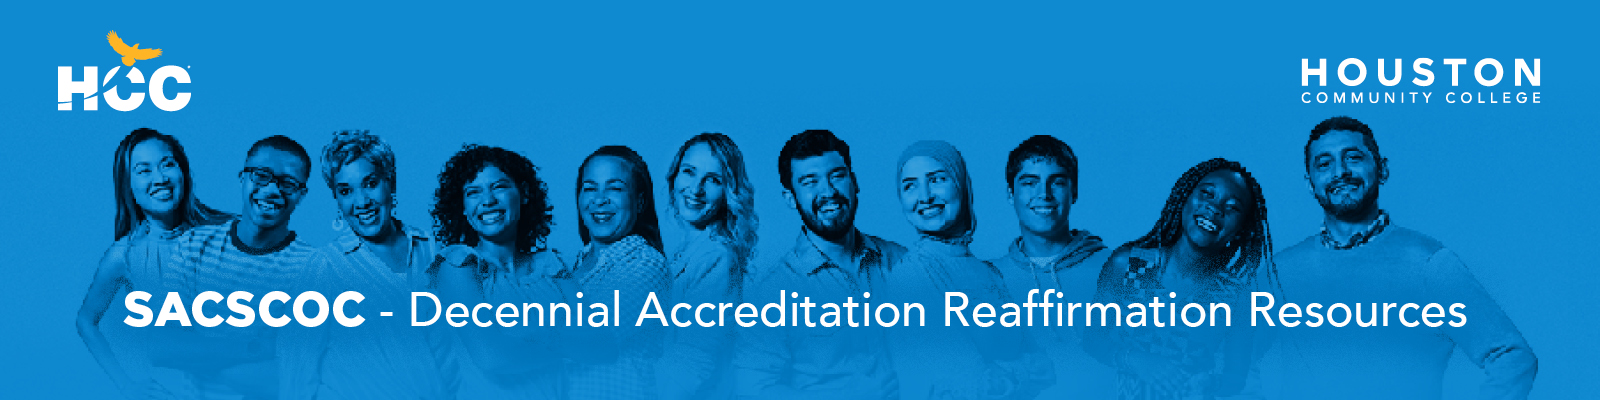 This is the SACSCOC Decennial Accreditation Reaffirmation Resources banner image